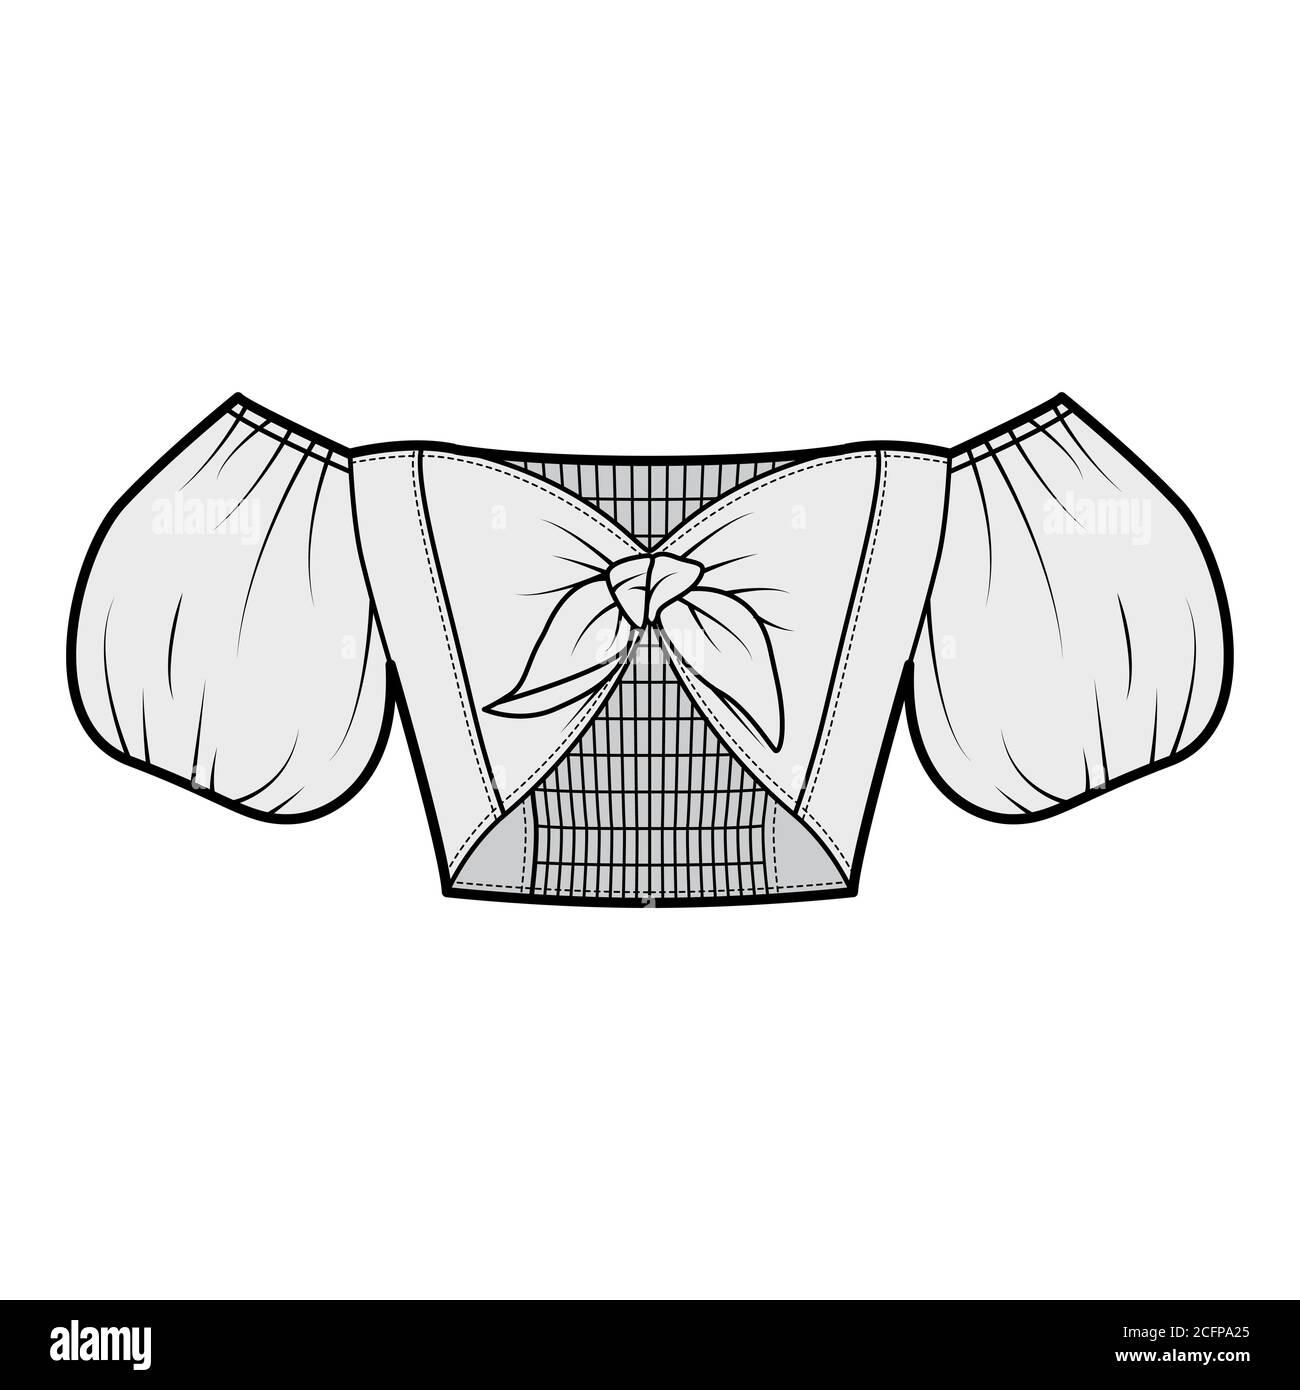 Tie-front cropped off-the-shoulder top technical fashion illustration with bow-detailed front, short puffy blouson sleeves, partially elasticated back. Flat template grey color. Women men unisex CAD Stock Vector